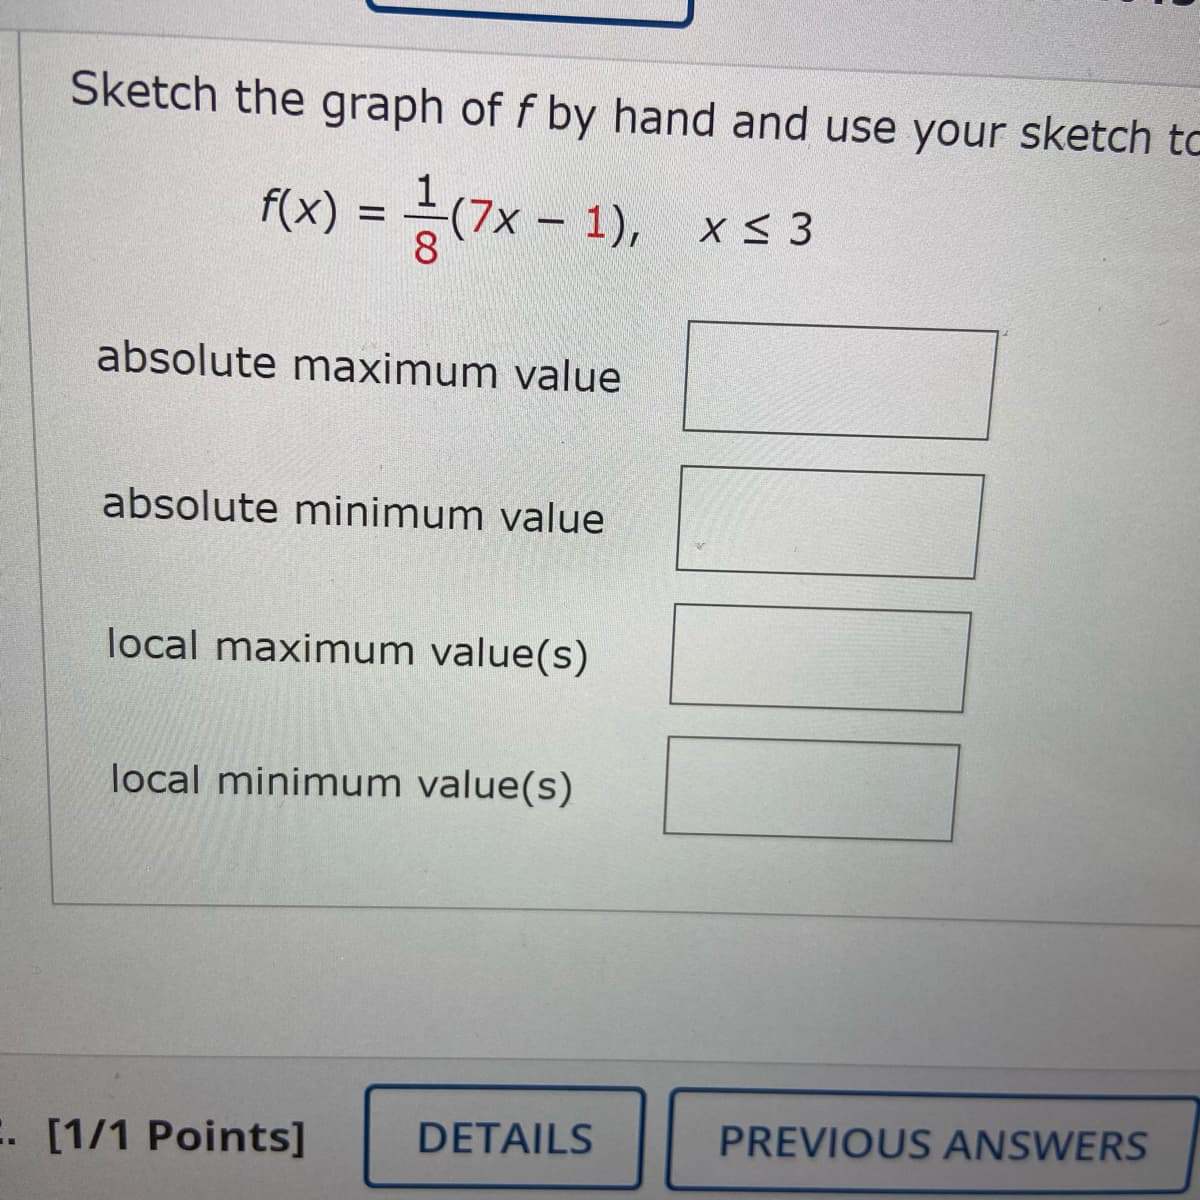 Sketch the graph of f by hand and use your sketch to
f(x) = (7x - 1), x< 3
absolute maximum value
absolute minimum value
local maximum value(s)
local minimum value(s)
E. [1/1 Points]
DETAILS
PREVIOUS ANSWERS
